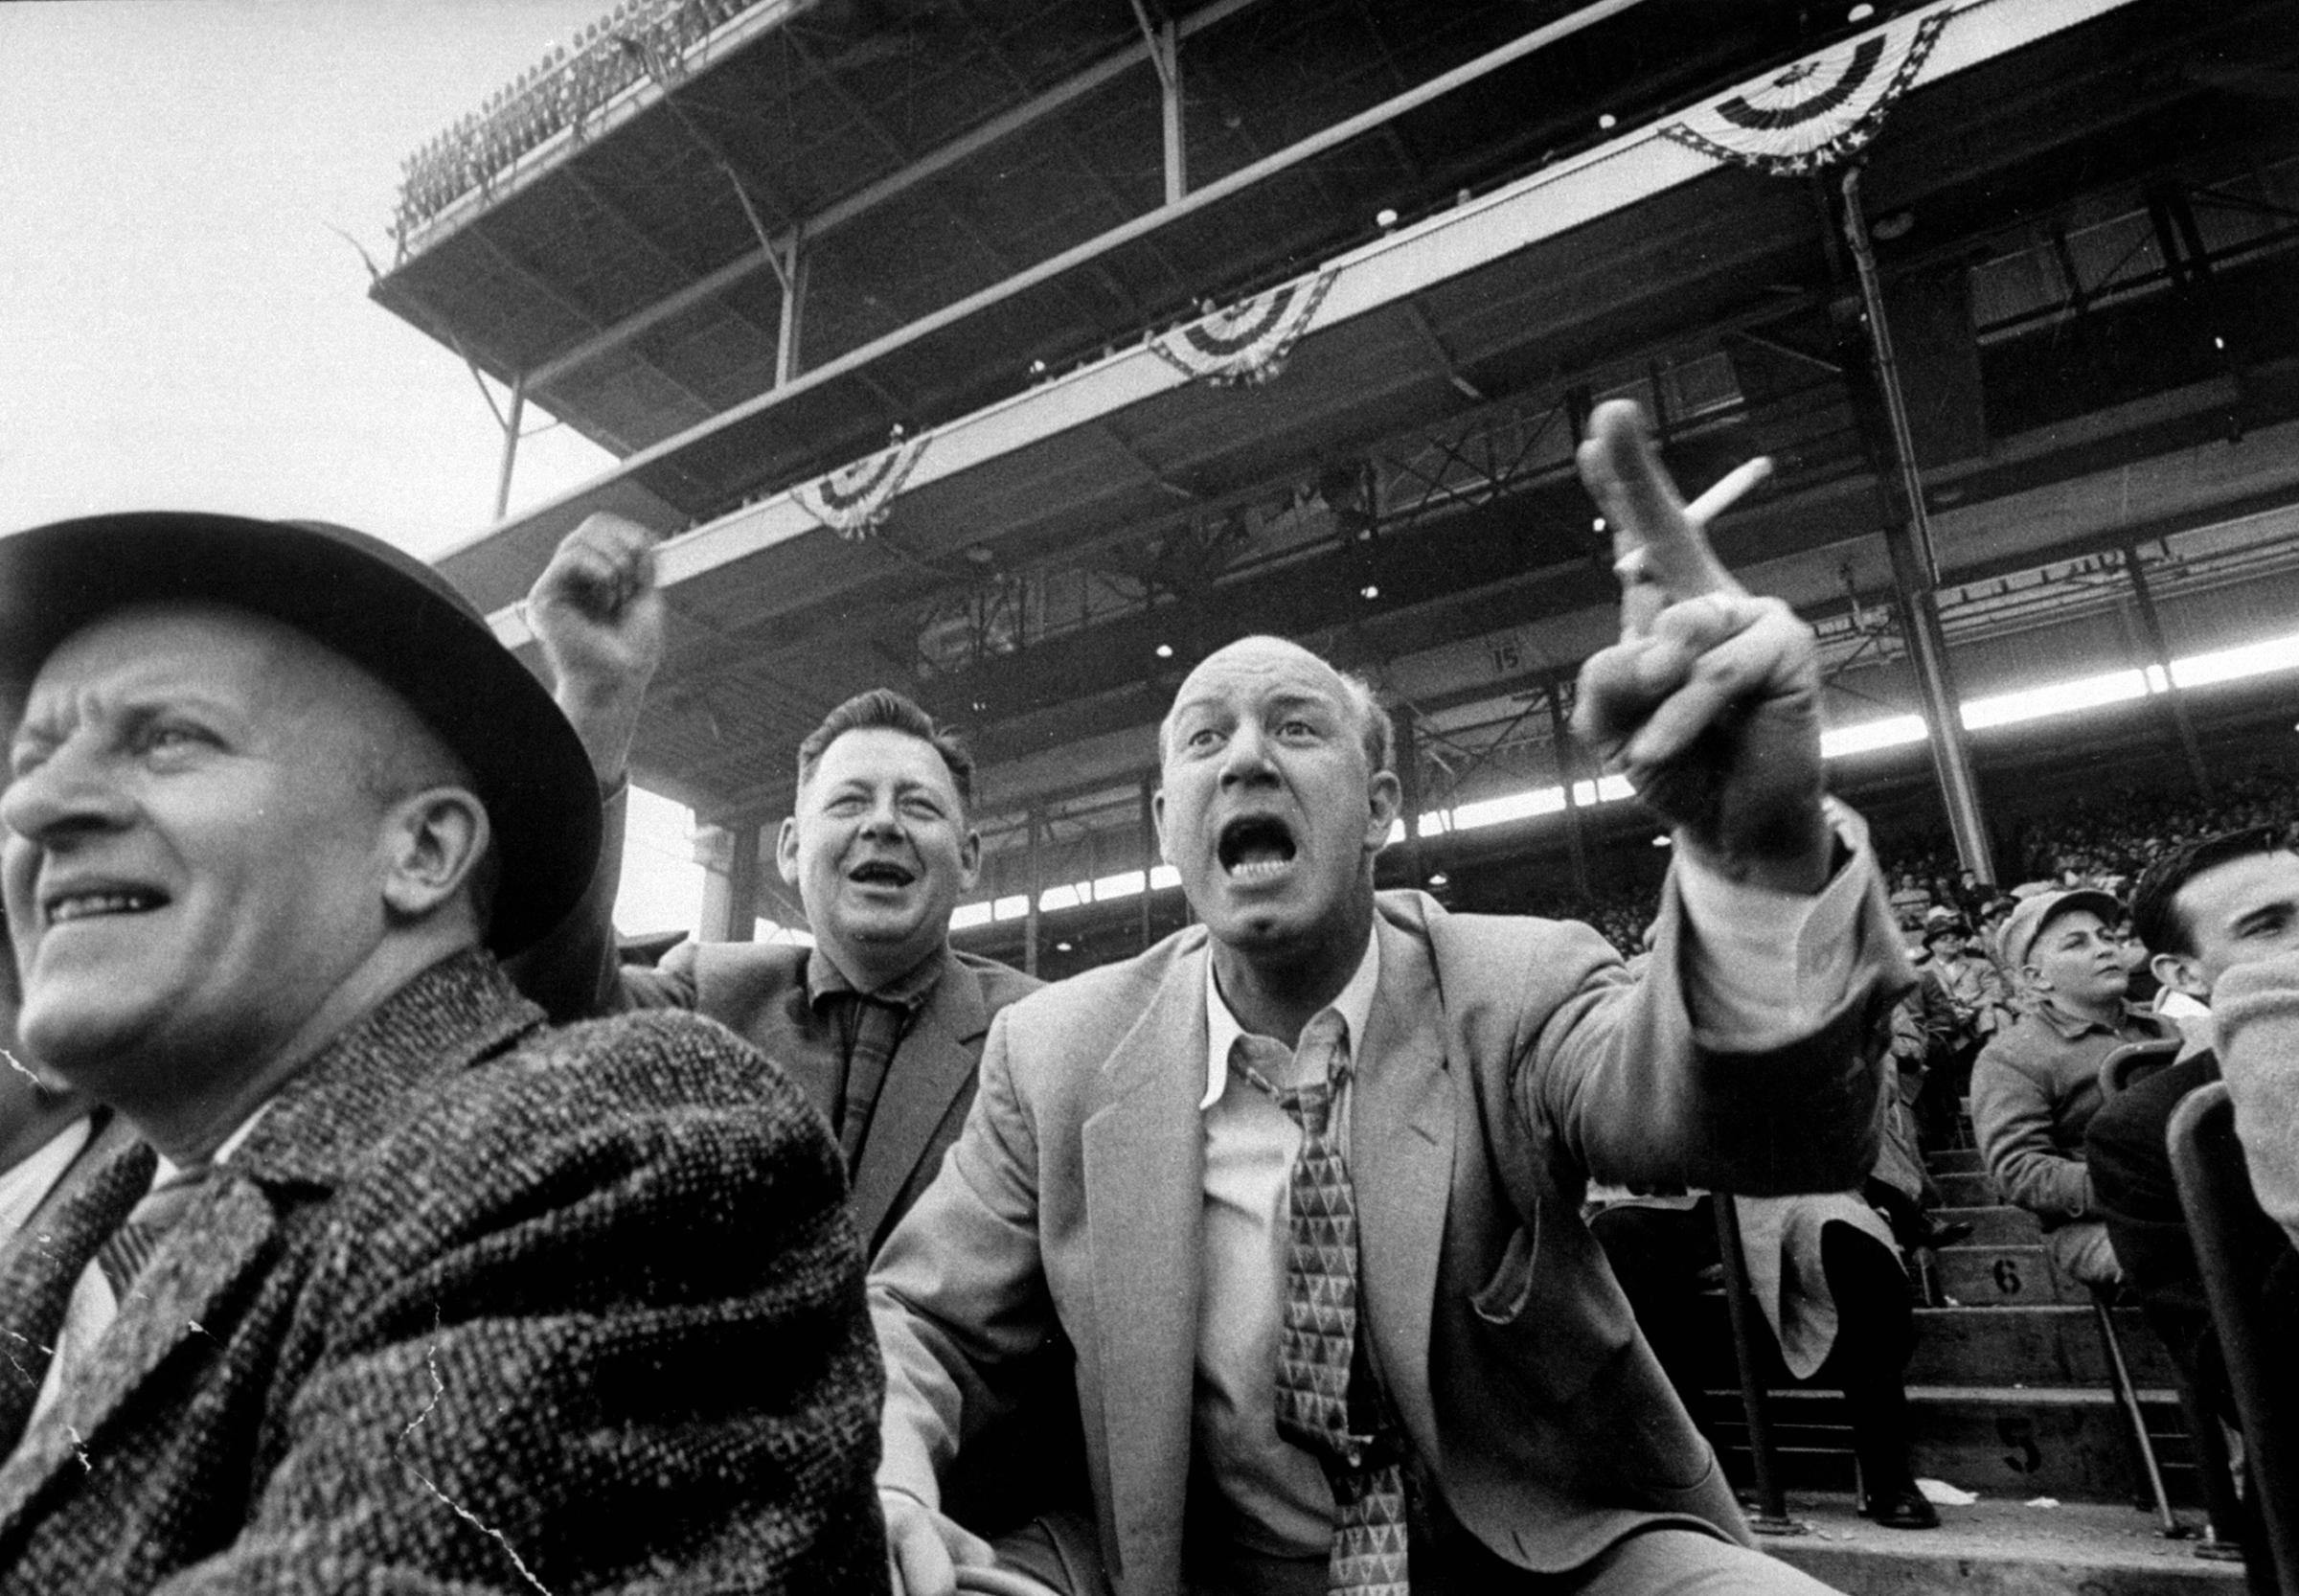 Fans at opening day of baseball, Milwaukee, 1957.